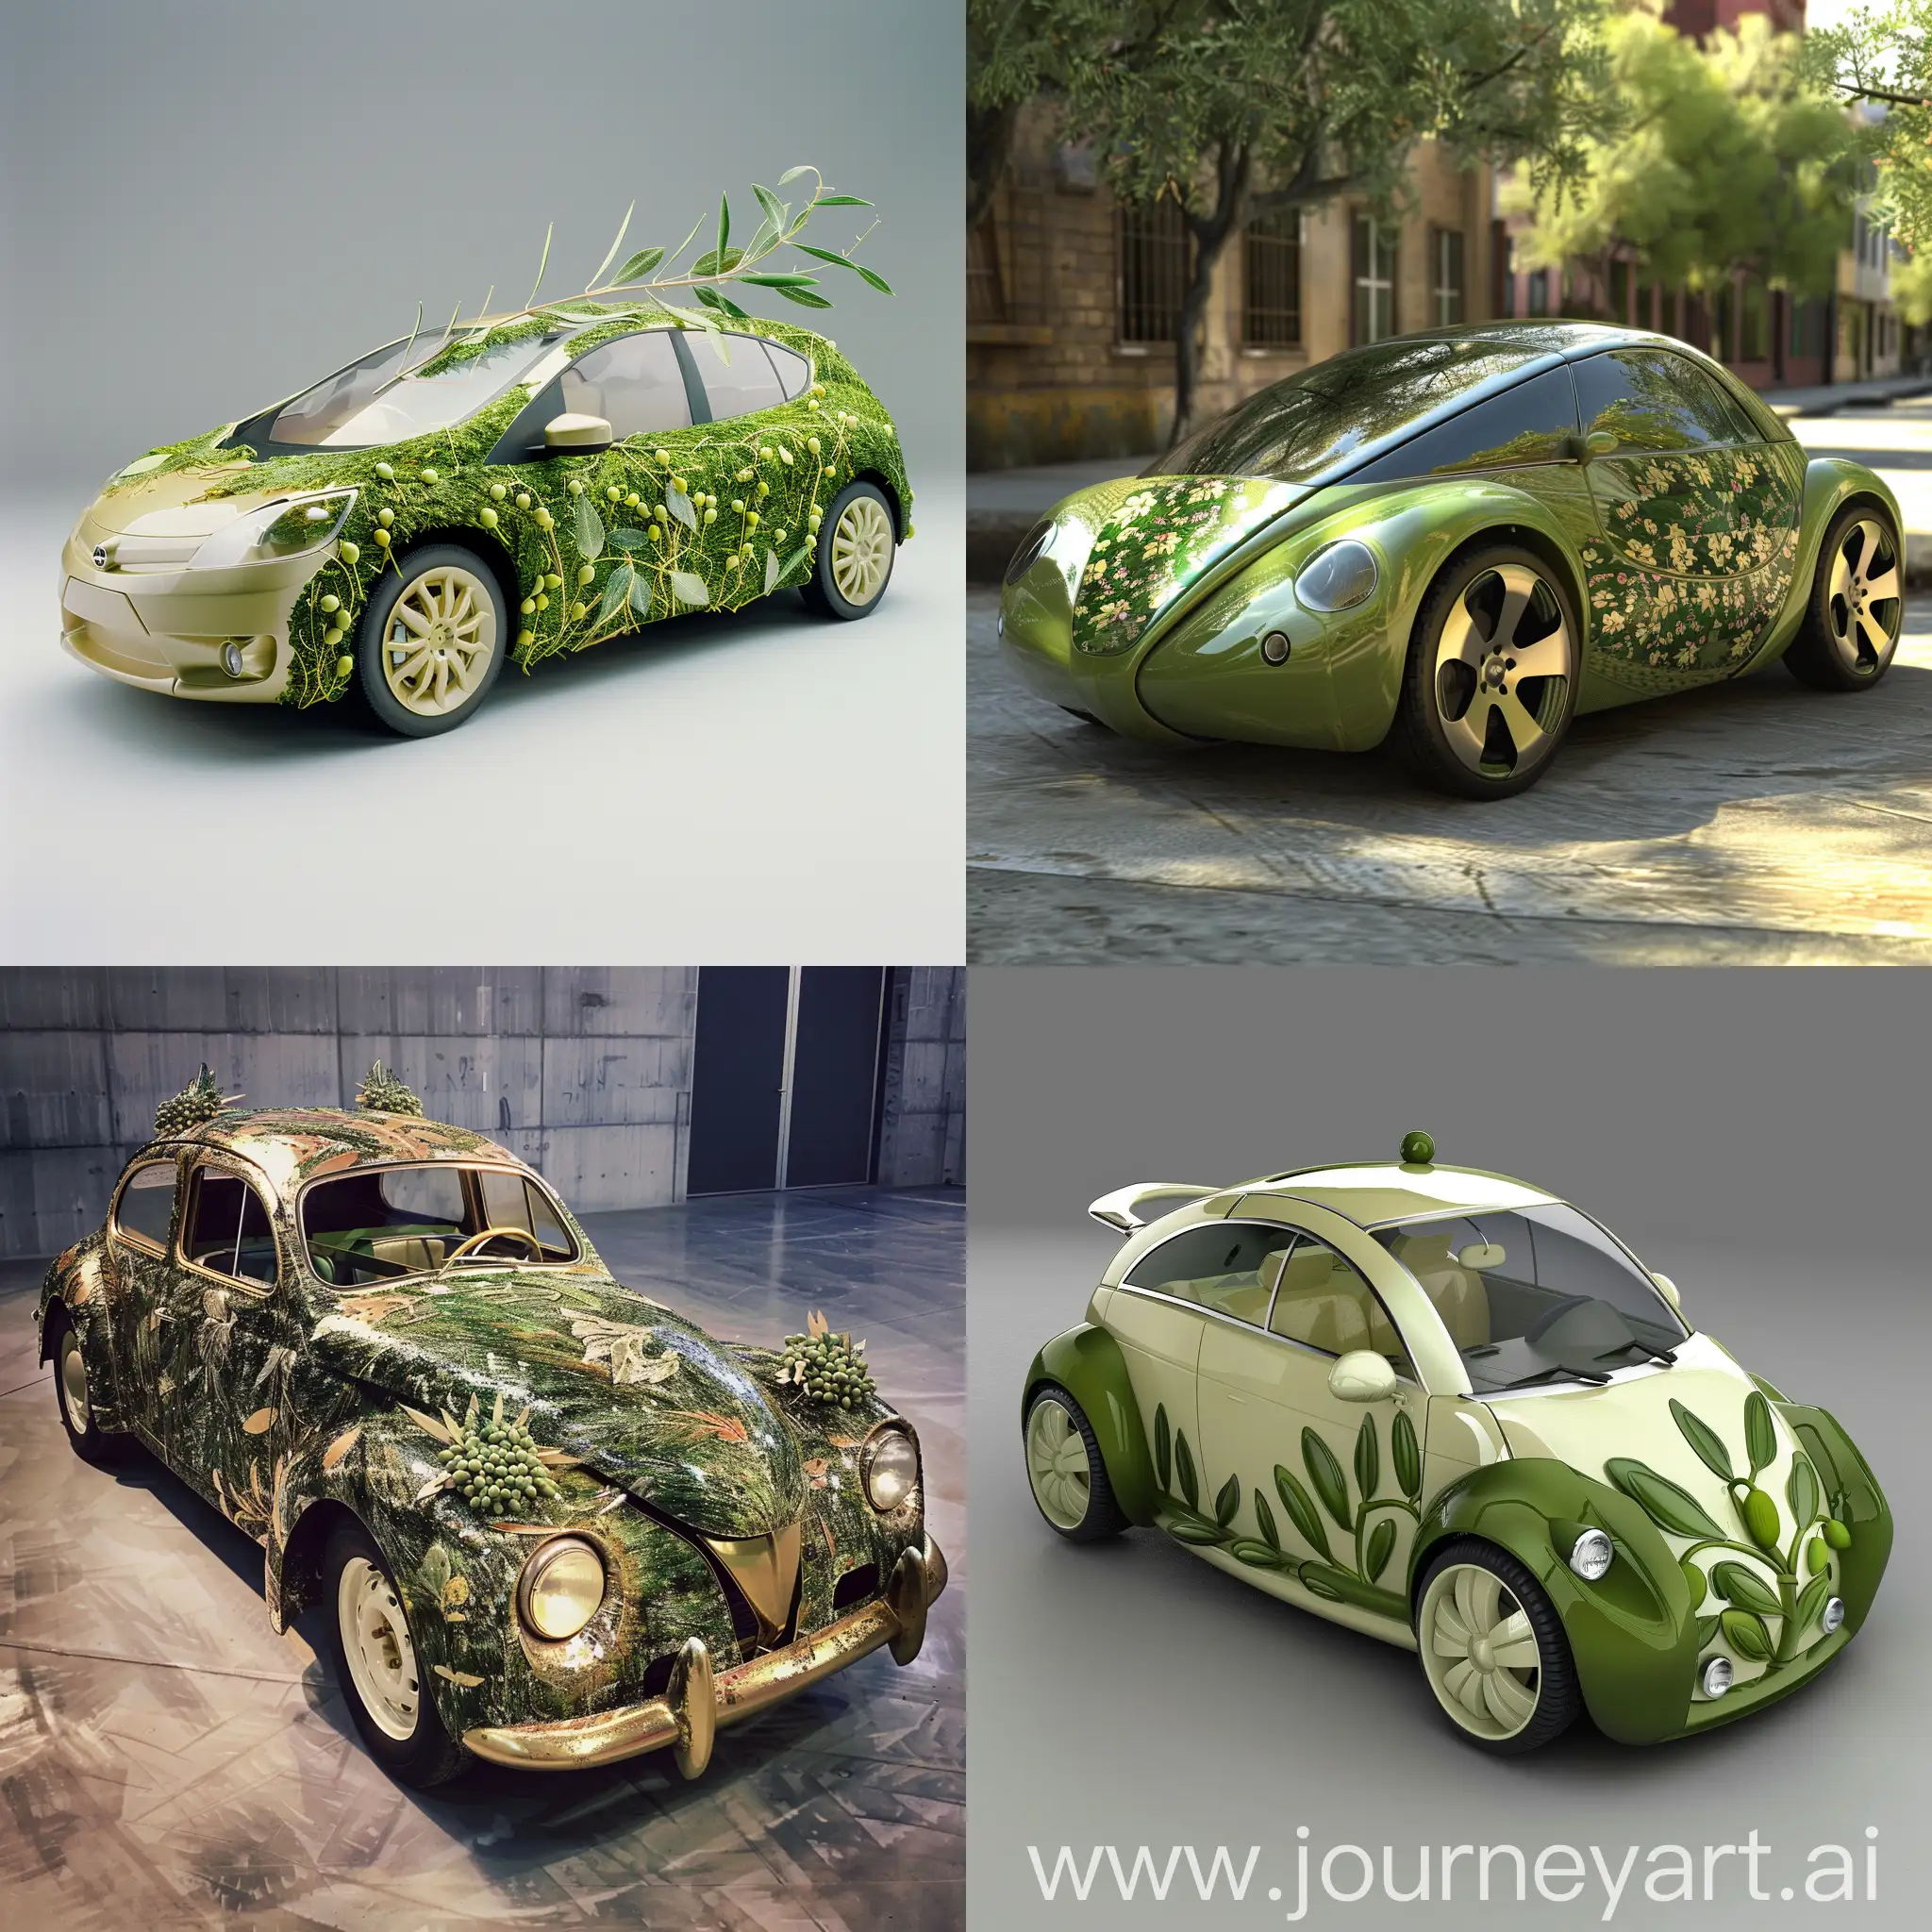 EcoFriendly-Olive-OilPowered-V6-Car-in-Stunning-11-Aspect-Ratio